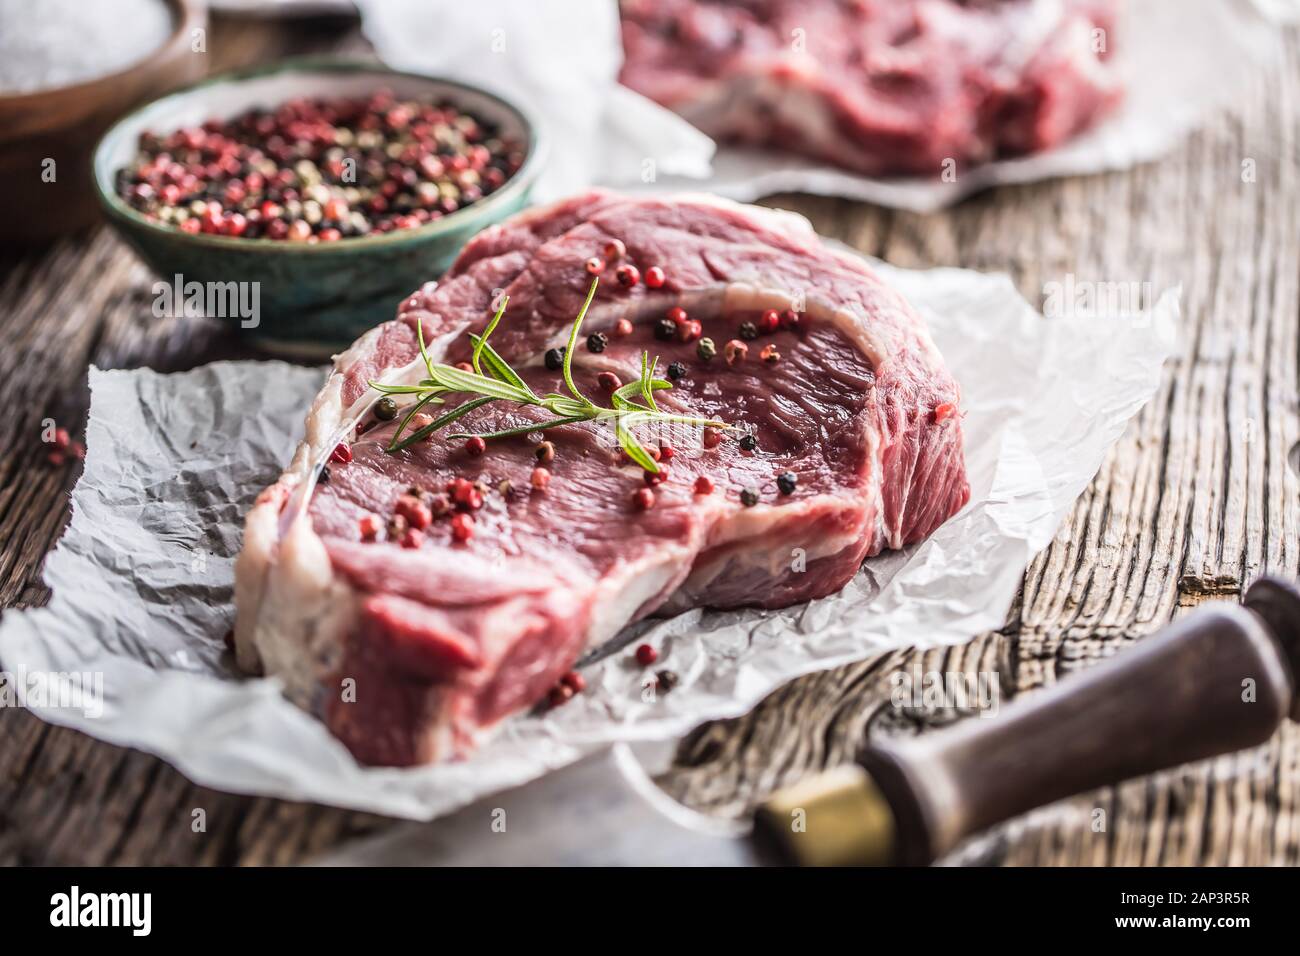 Beef Rib Eye steak with salt pepper and rosemary on wooden table Stock Photo